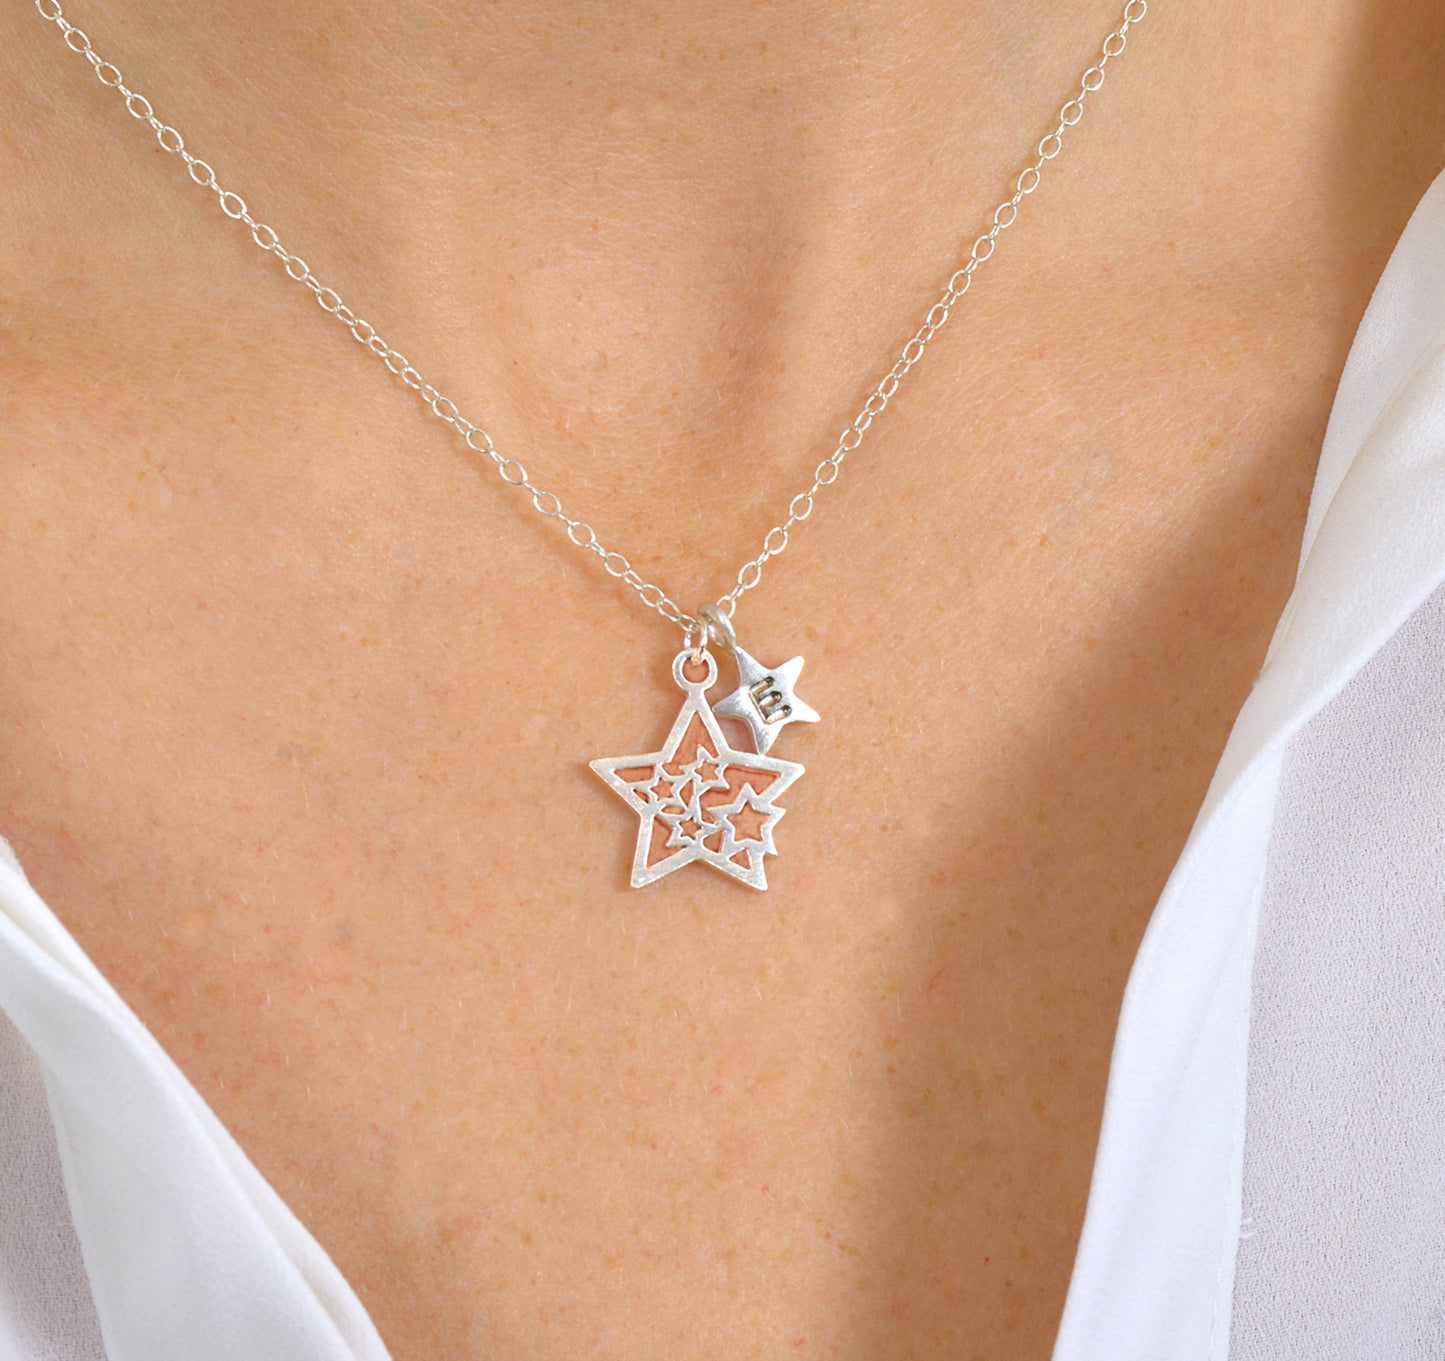 Personalised You Are A Star Necklace, Thank You Initial Star Charm Pendant